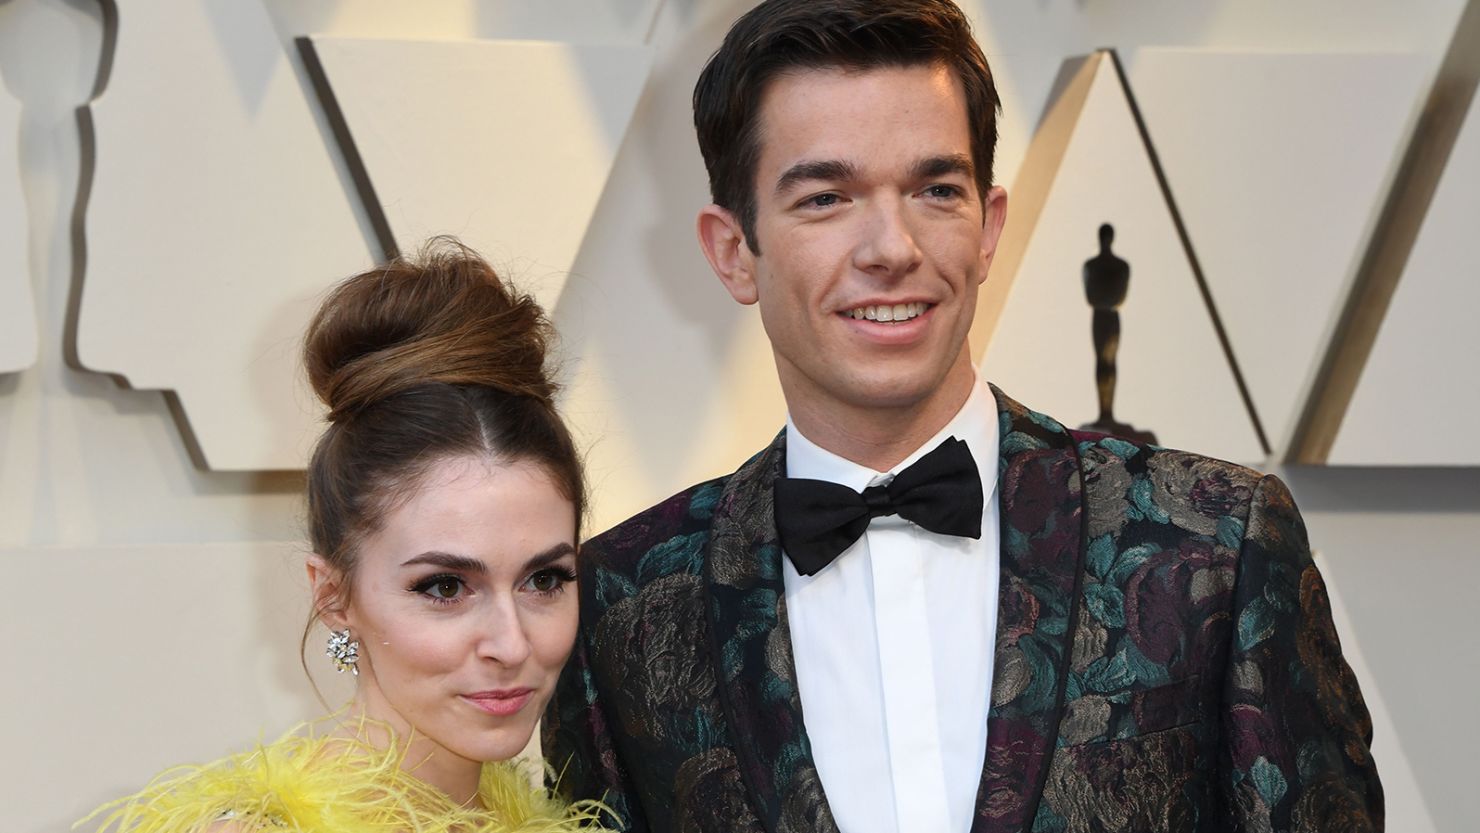 John Mulaney and Anna Marie Tendler, shown here in 2019, are getting divorced.